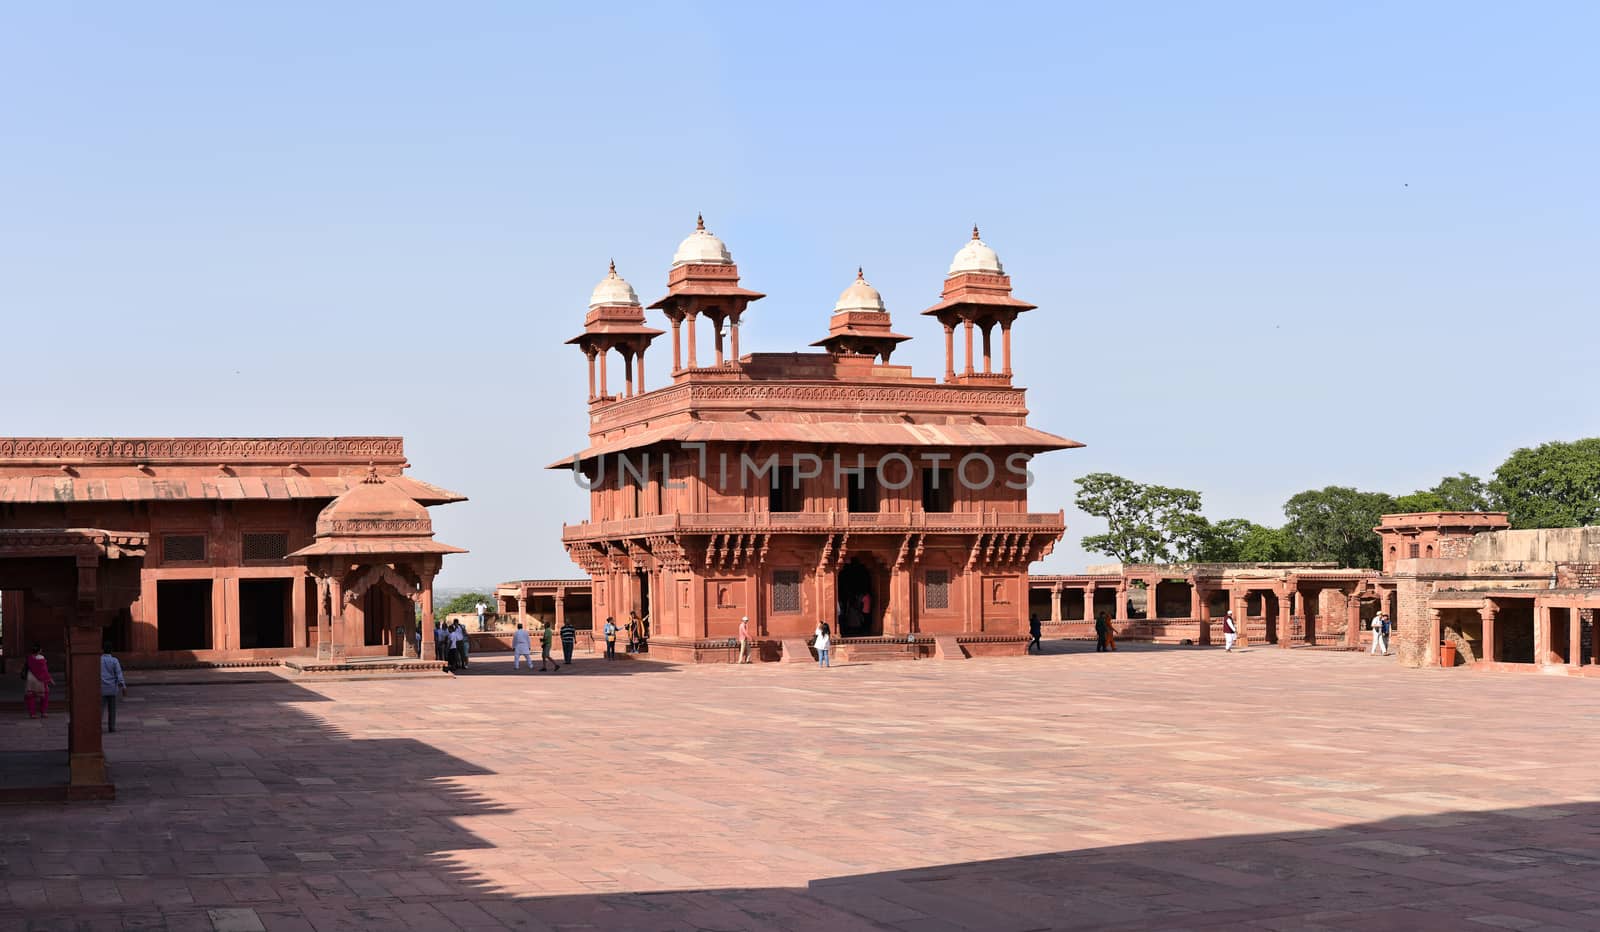 UNESCO World Heritage site Fatehpur Sikri, India. by dushi82